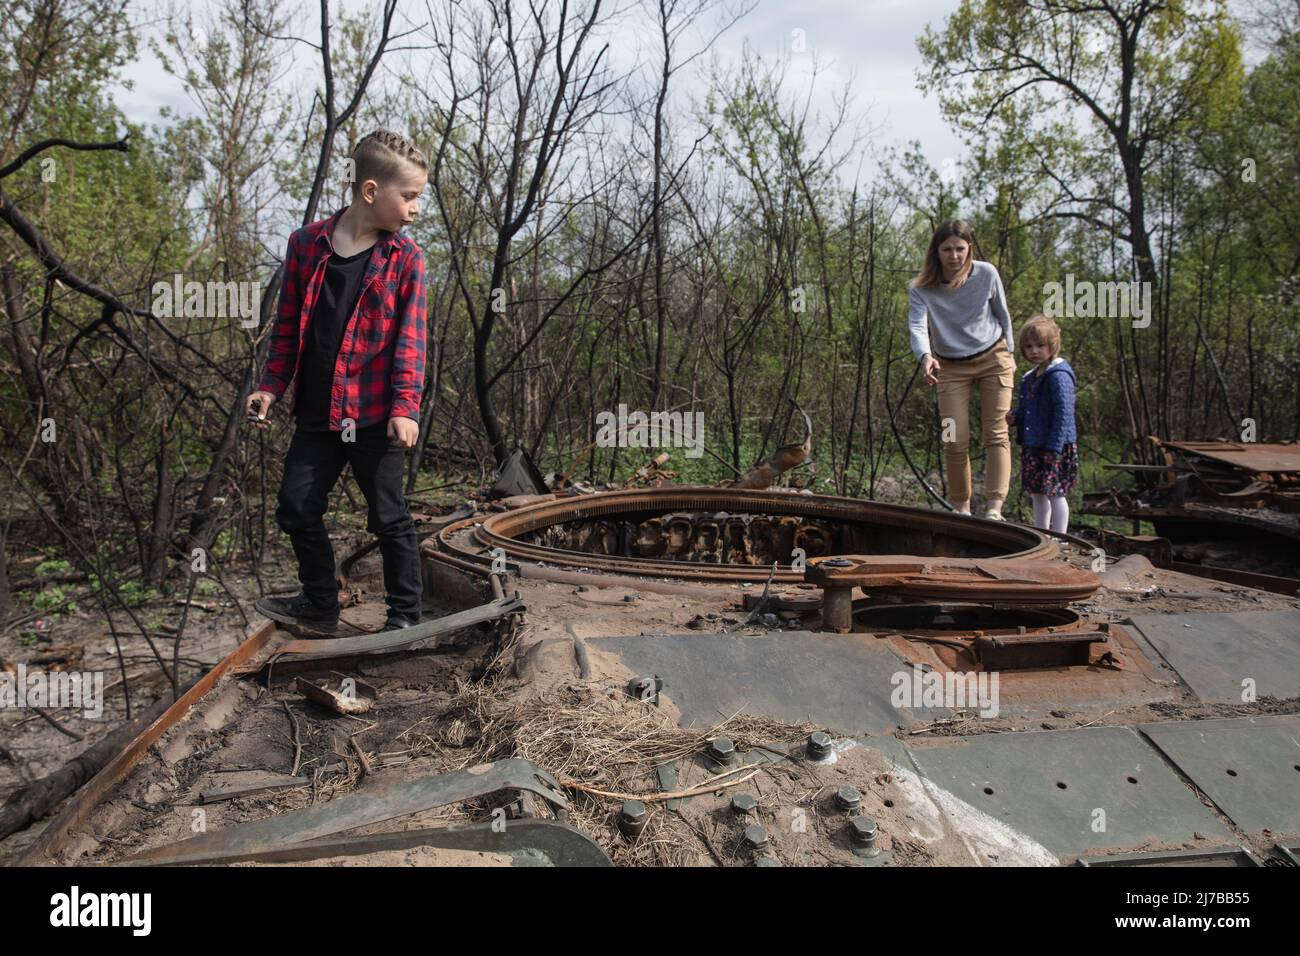 ?hildren stand on the tower of a destroyed Russian tank. Russia invaded Ukraine on 24 February 2022, triggering the largest military attack in Europe since World War II. Stock Photo